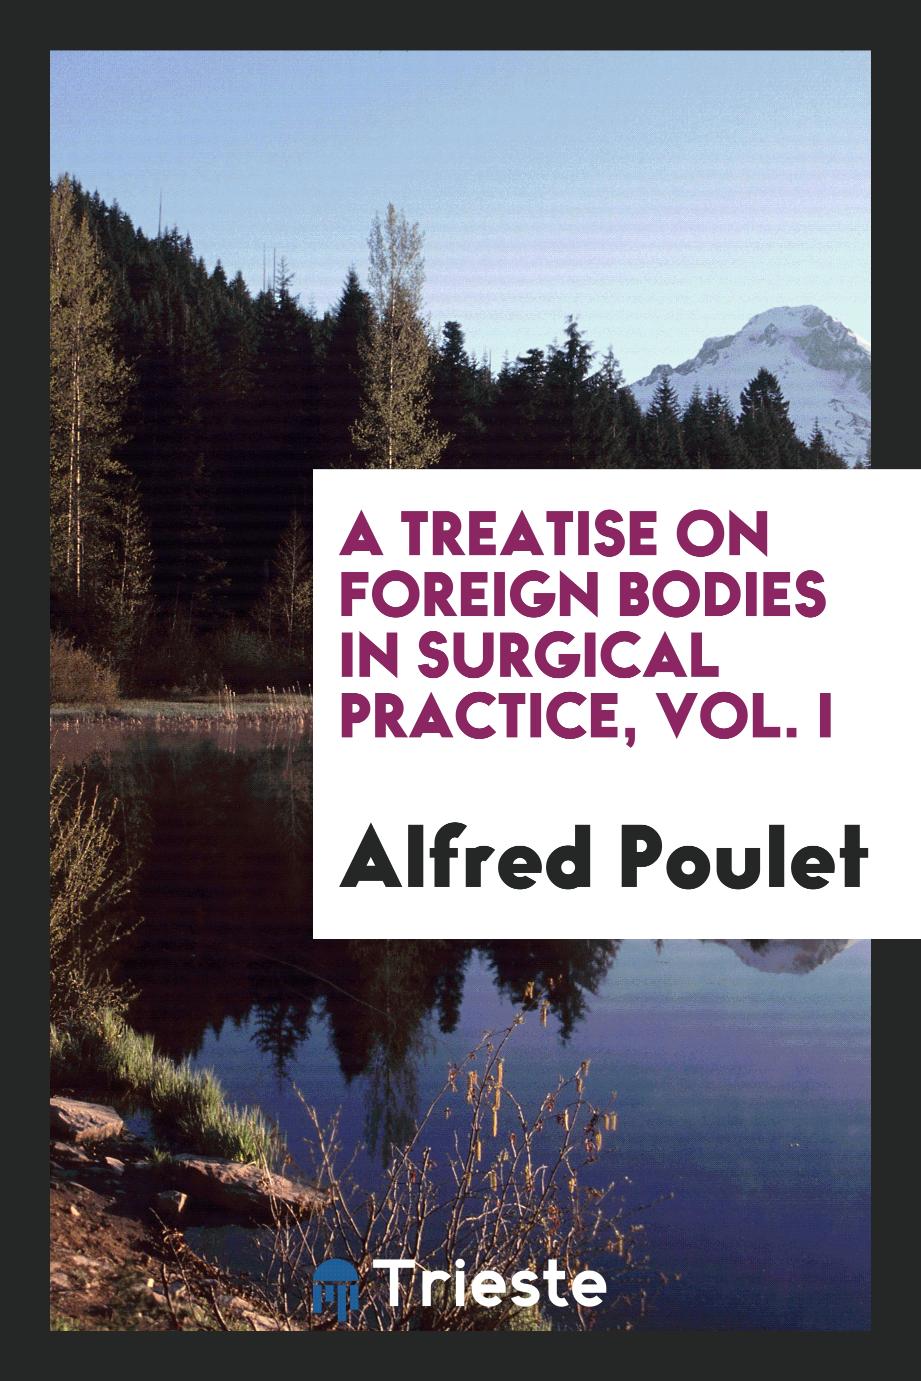 A Treatise on Foreign Bodies in Surgical Practice, Vol. I